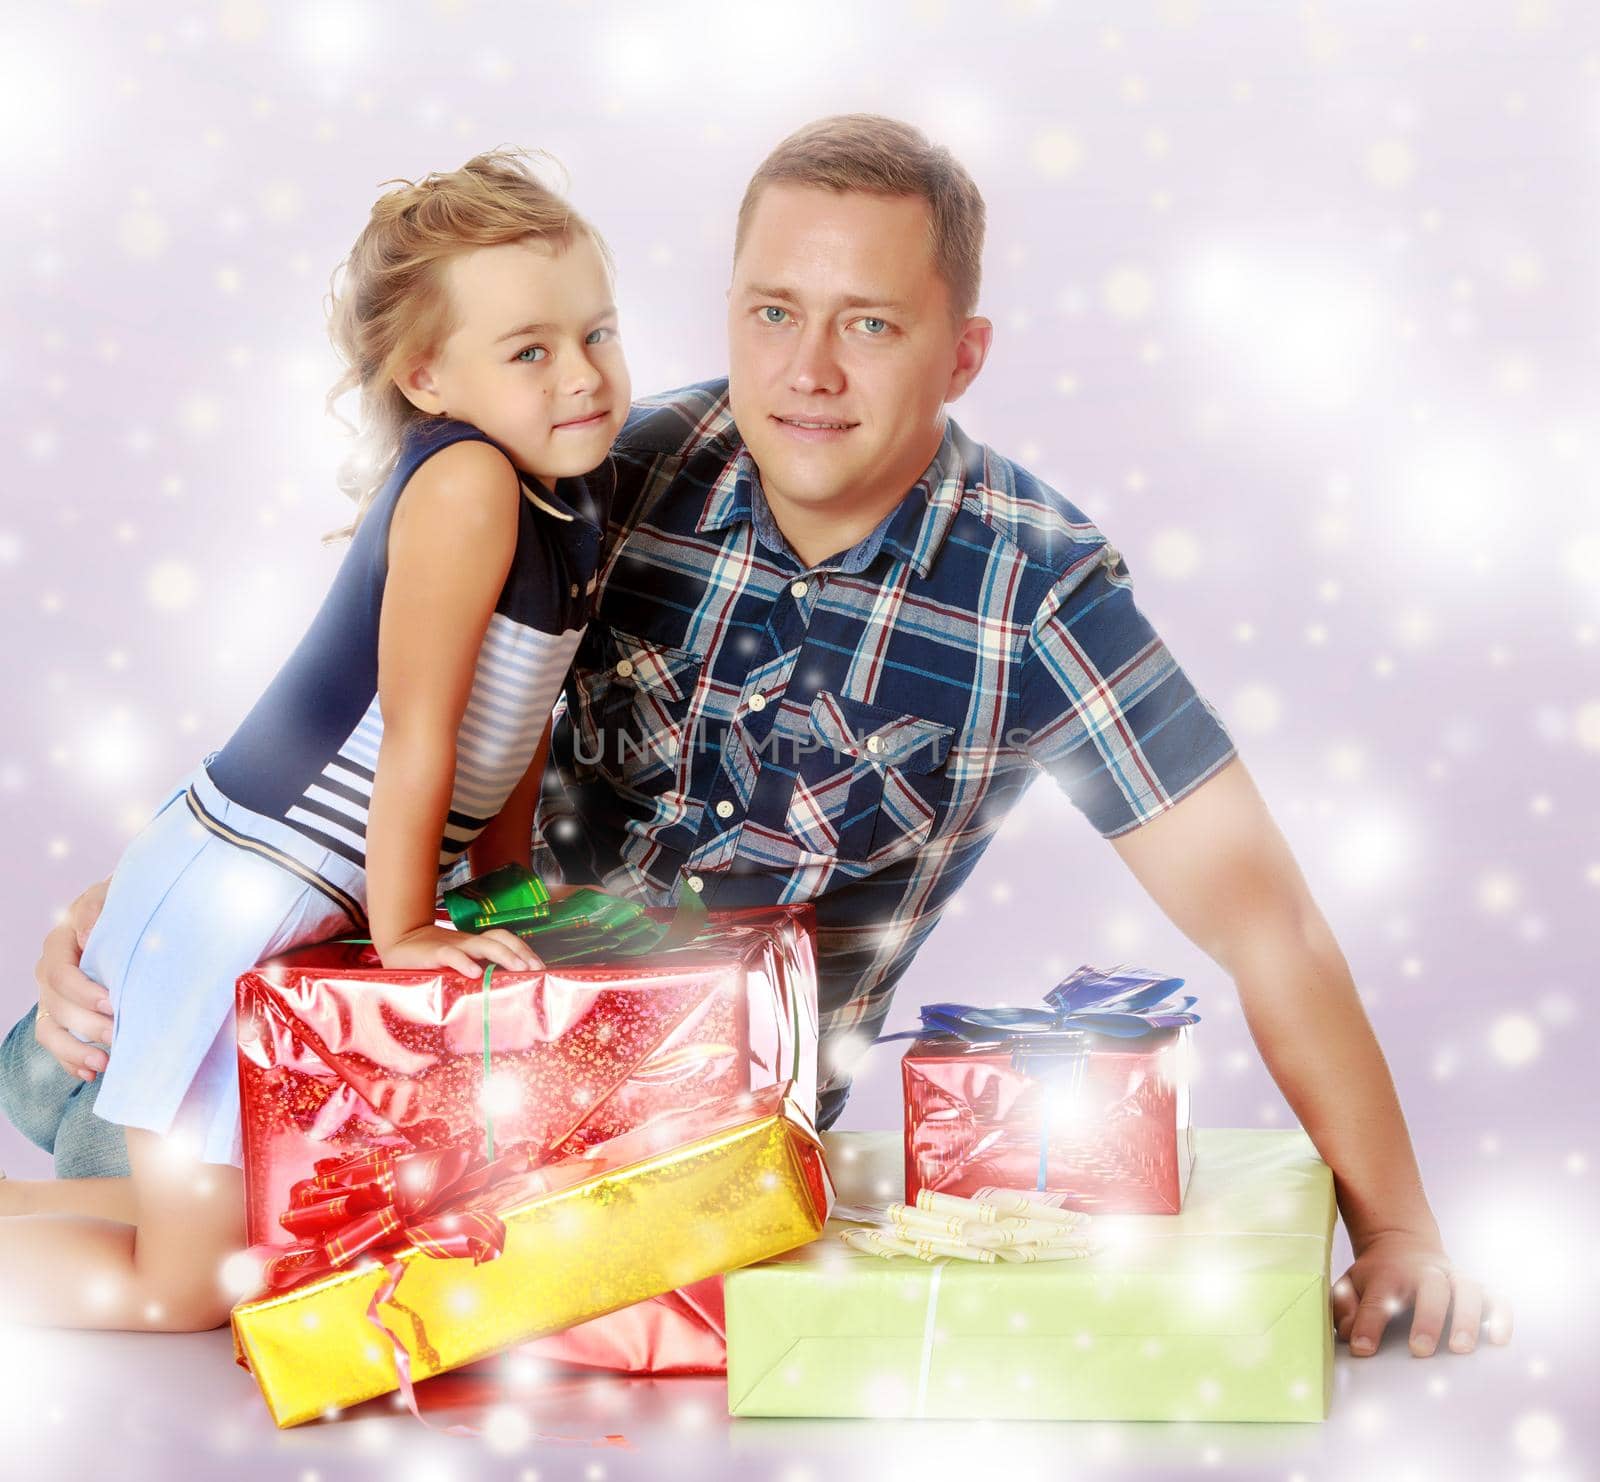 Cute little girl with her favorite dad, sitting on the floor surrounded by a variety of beautifully packaged boxes with gifts.Blue Christmas festive background with white snowflakes.